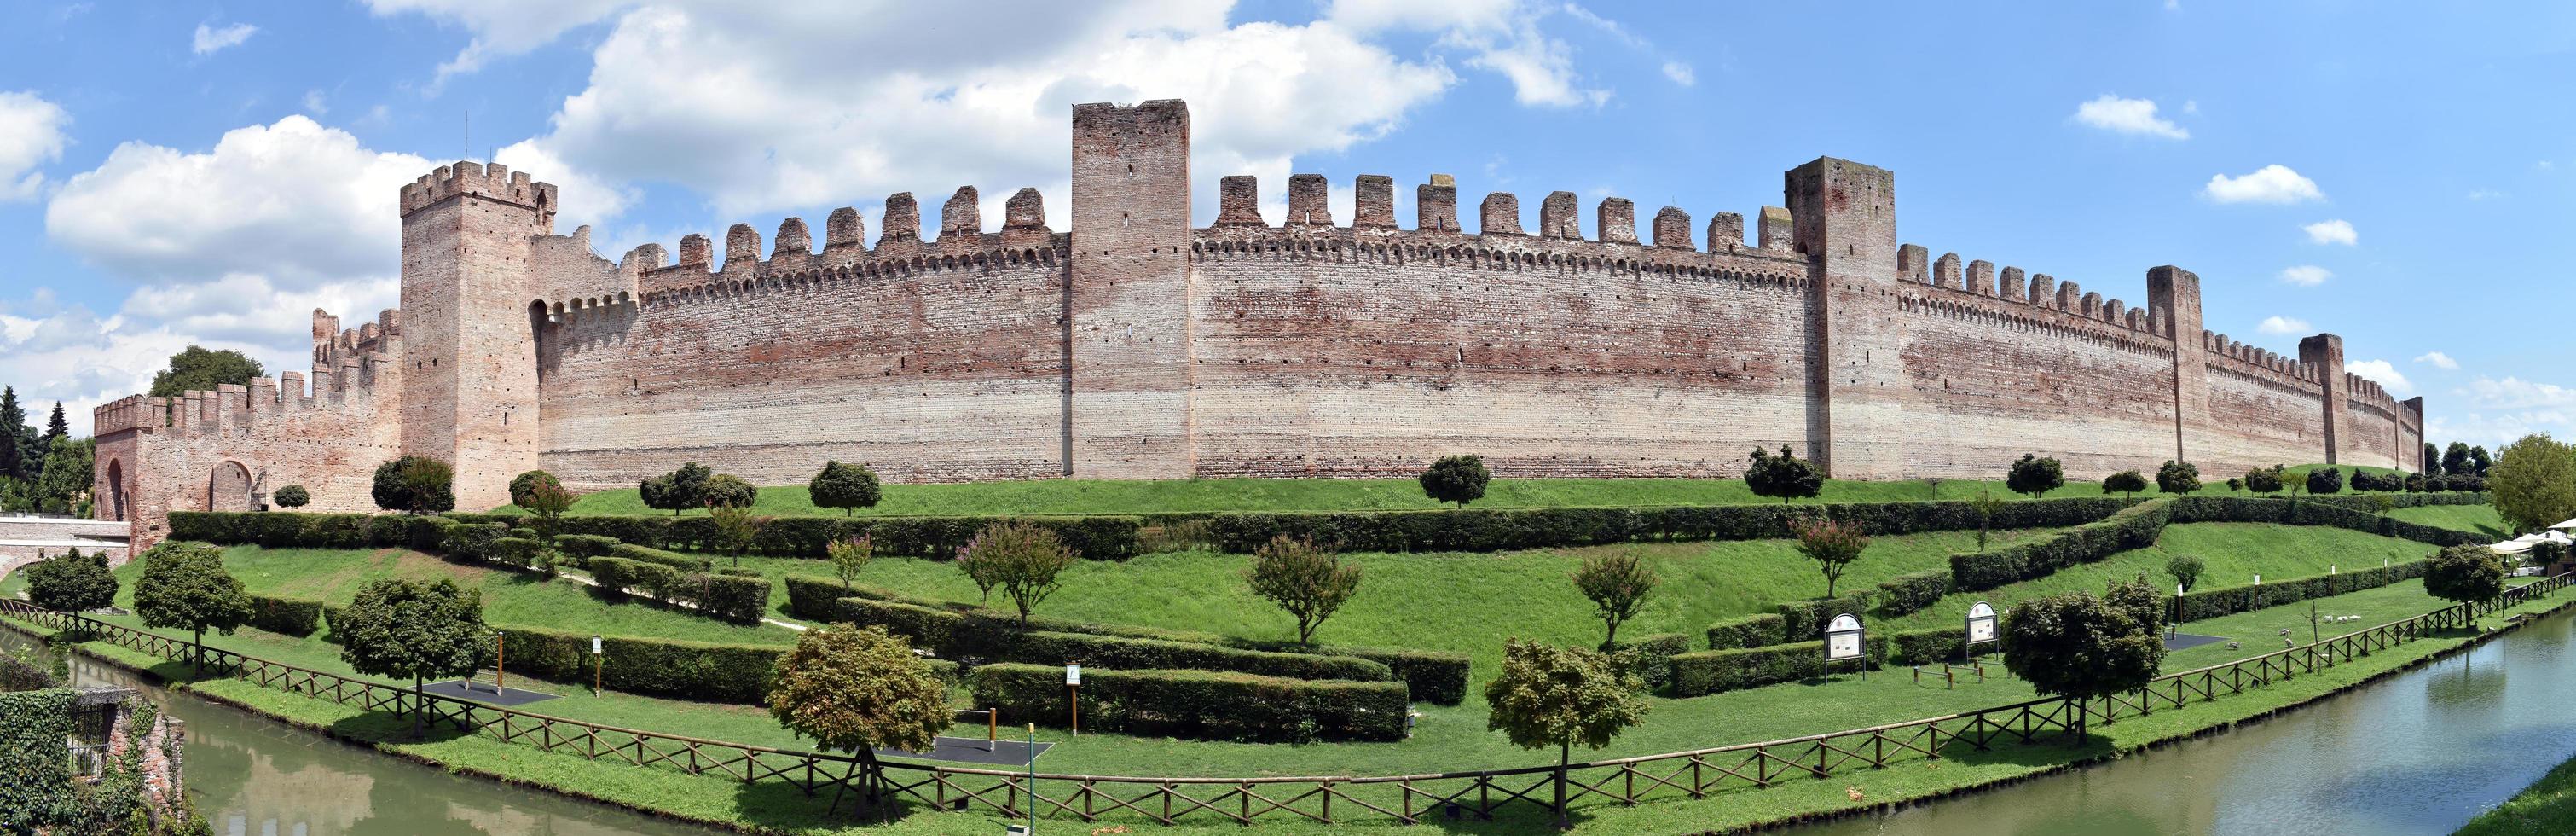 Panorama view of the walls of the fortified medieval town of Cittadella. Padova, Italy. photo